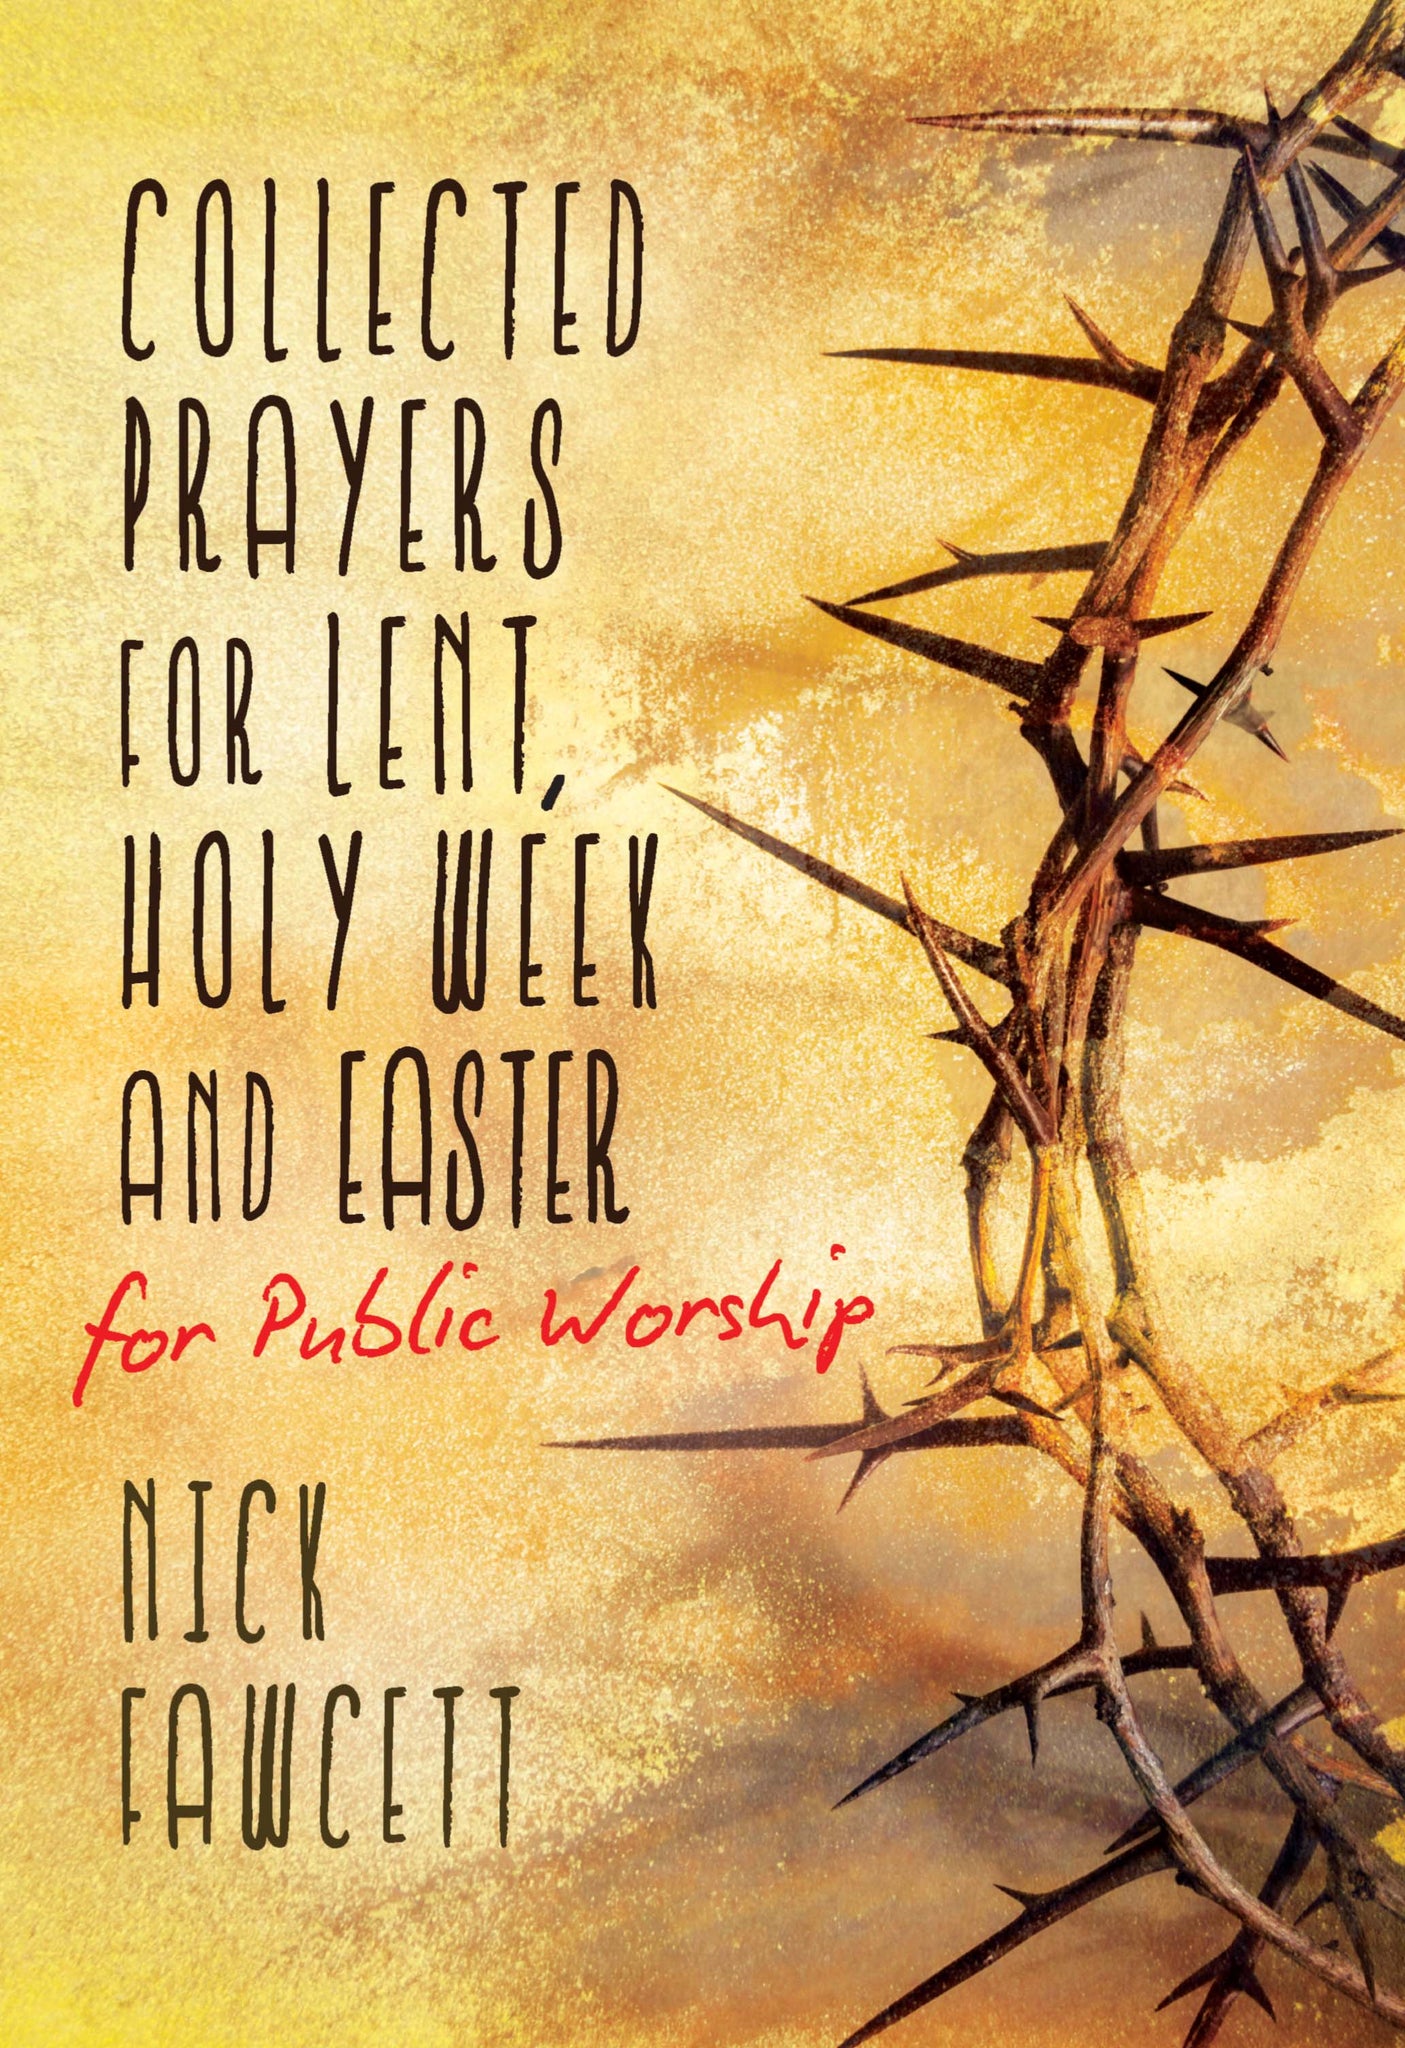 Collected Prayers For Lent, Holy Week & EasterCollected Prayers For Lent, Holy Week & Easter